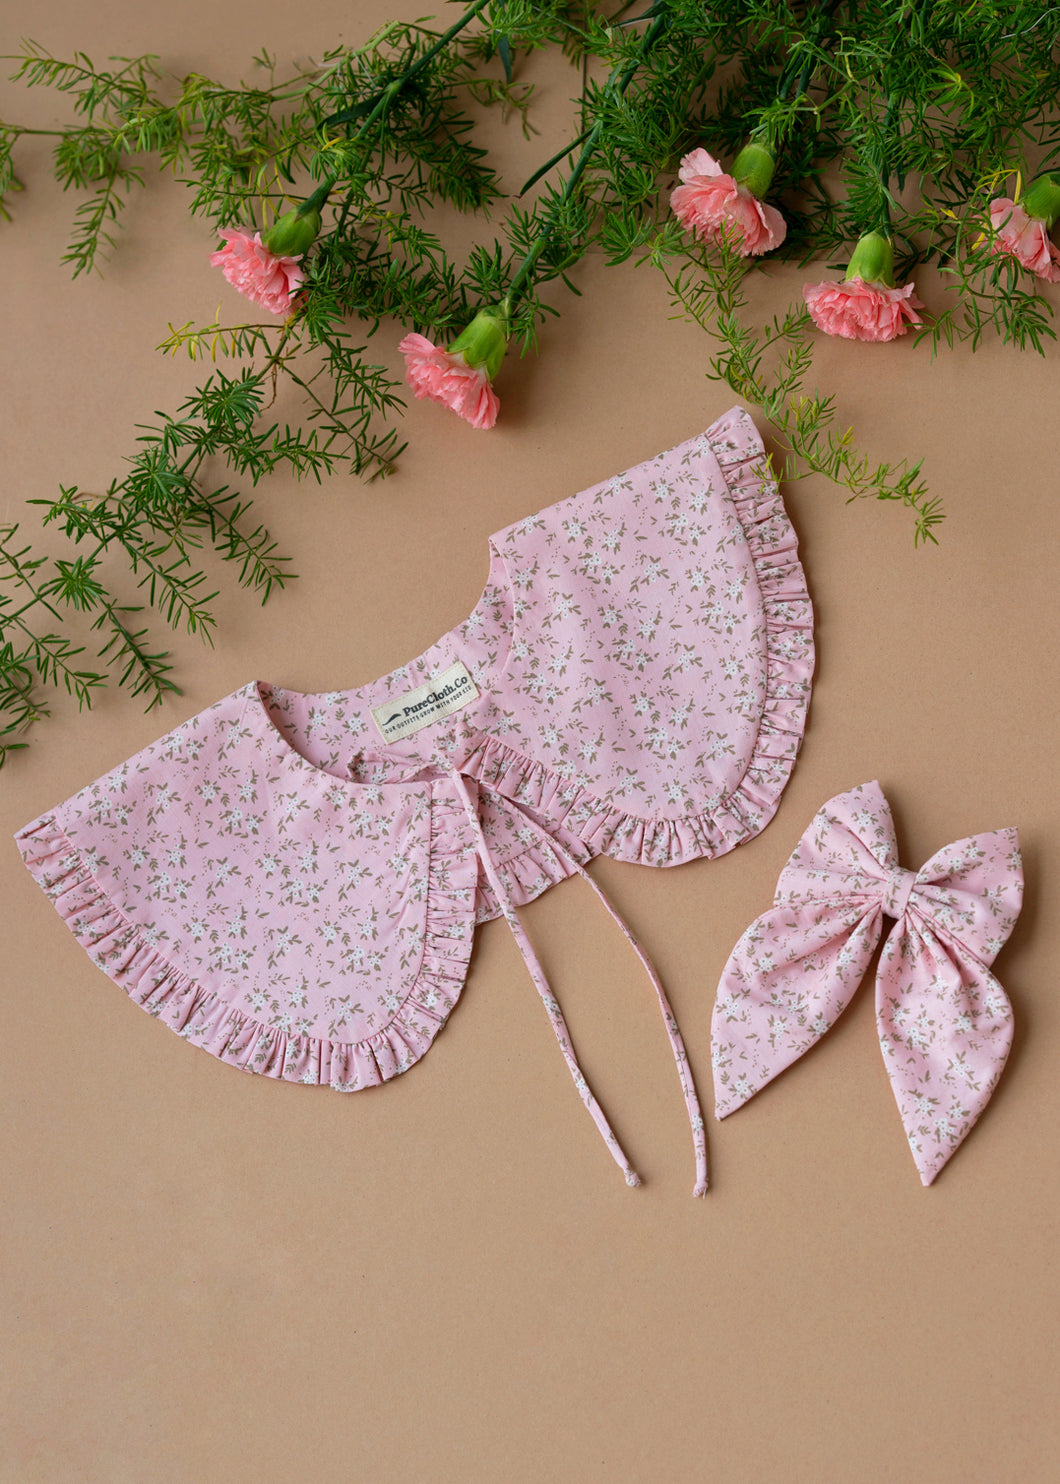 A beautiful pink floral combo of detachable victorian style collar and matching bow with small frills around it for kids kept on light peach background with some flowers aside.